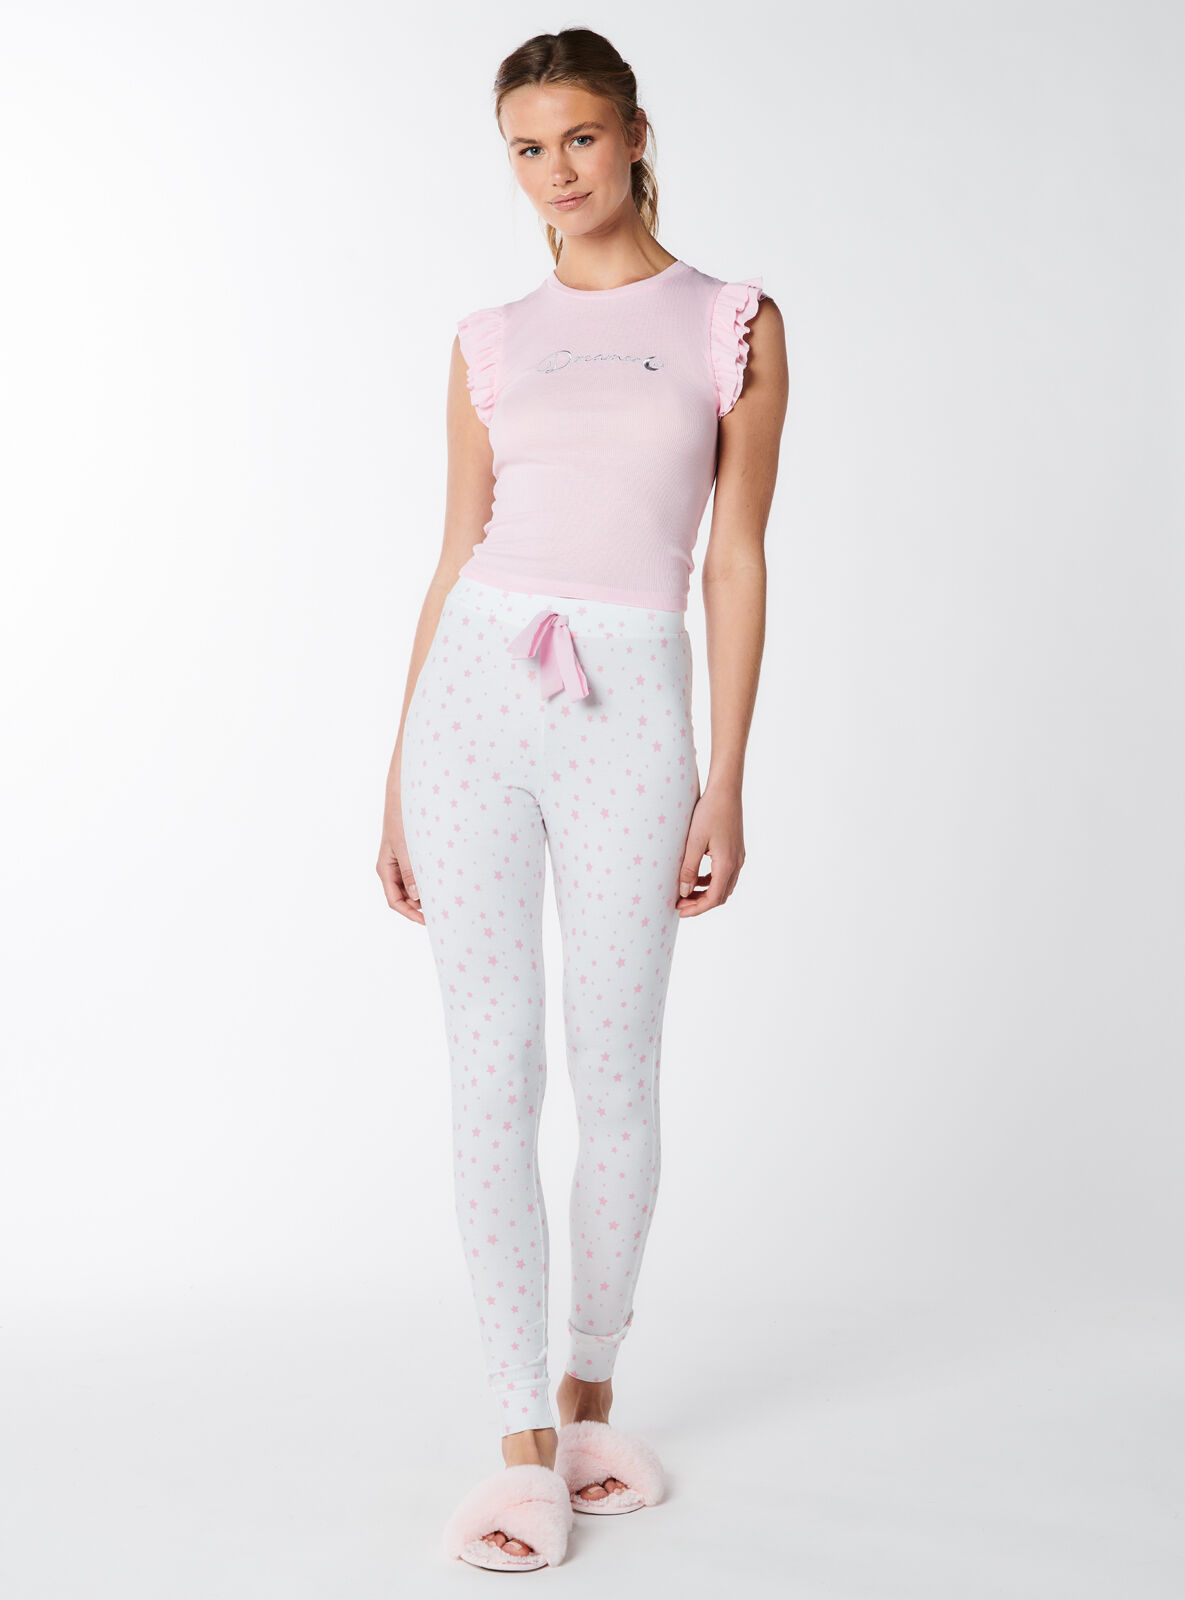 Boux Avenue Dreamer frill tee and leggings set - Pink Mix - 16